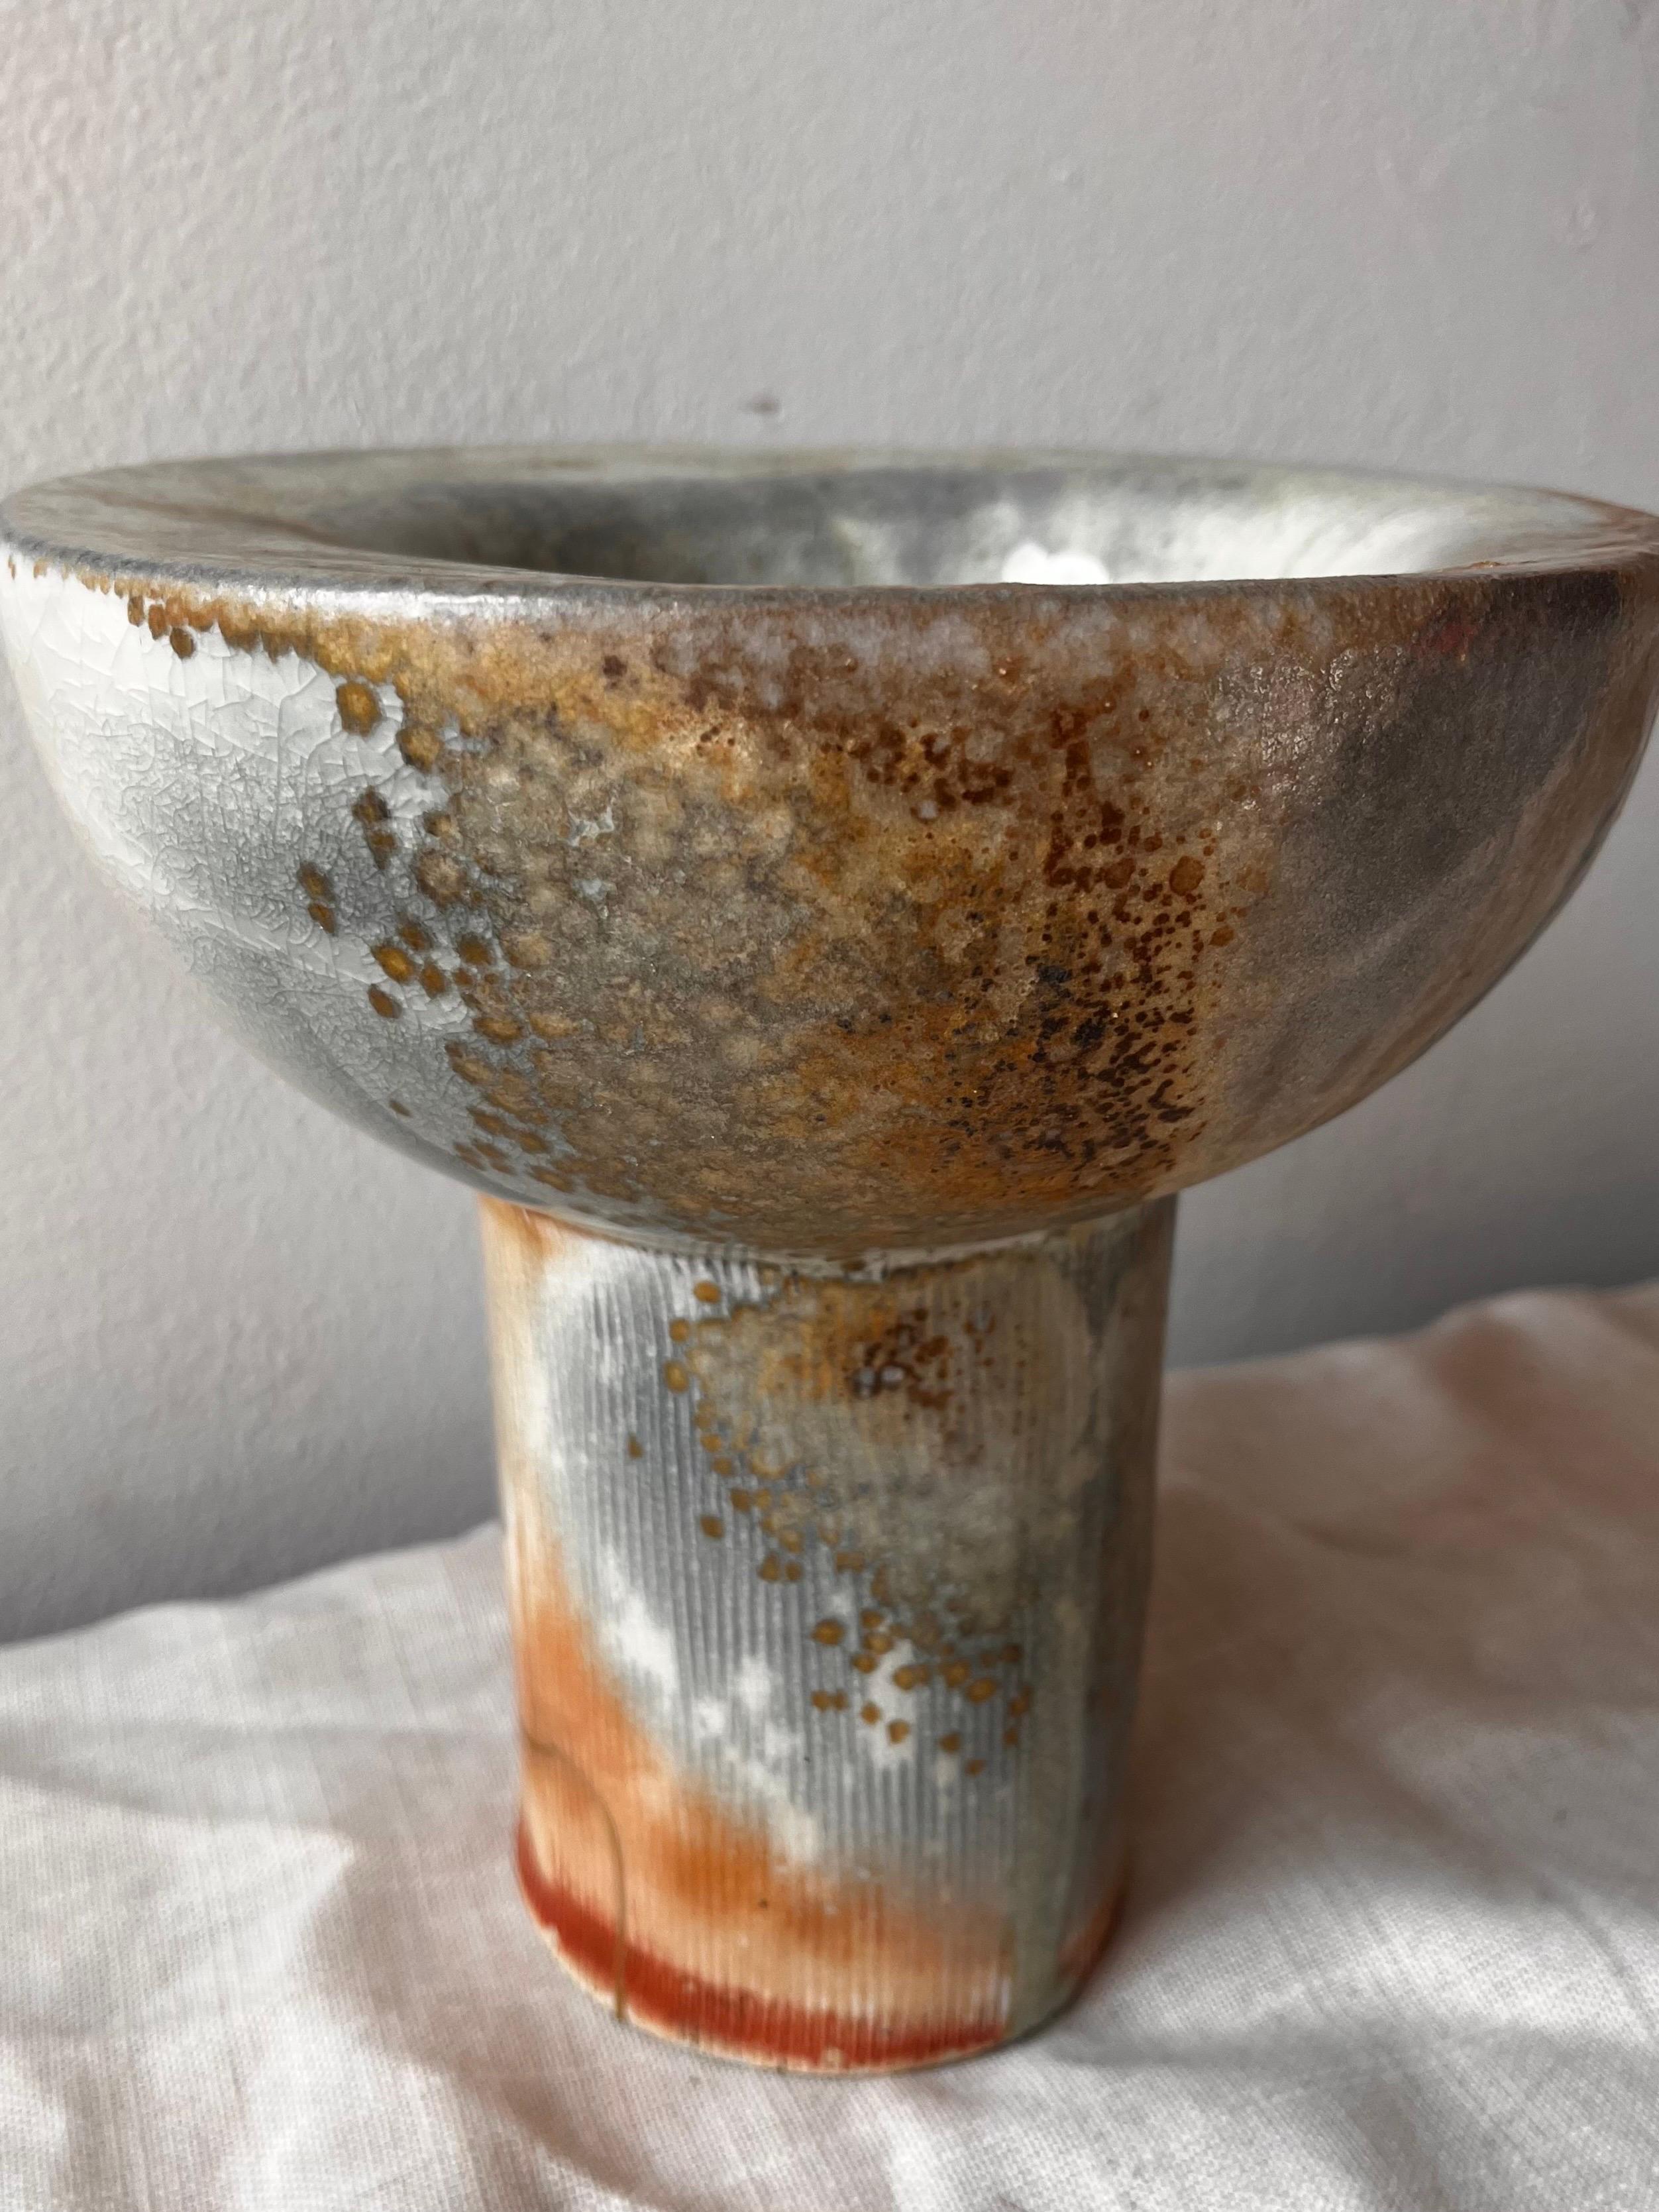 Hand-built porcelain pedestal bowl, wood-fired in a traditional anagama noborigama Japanese kiln in upstate New York. Shino glaze in blue and bronze tones with crystallization from wood-ash.  22 karat gold kintsugi repair on the base of the foot. 